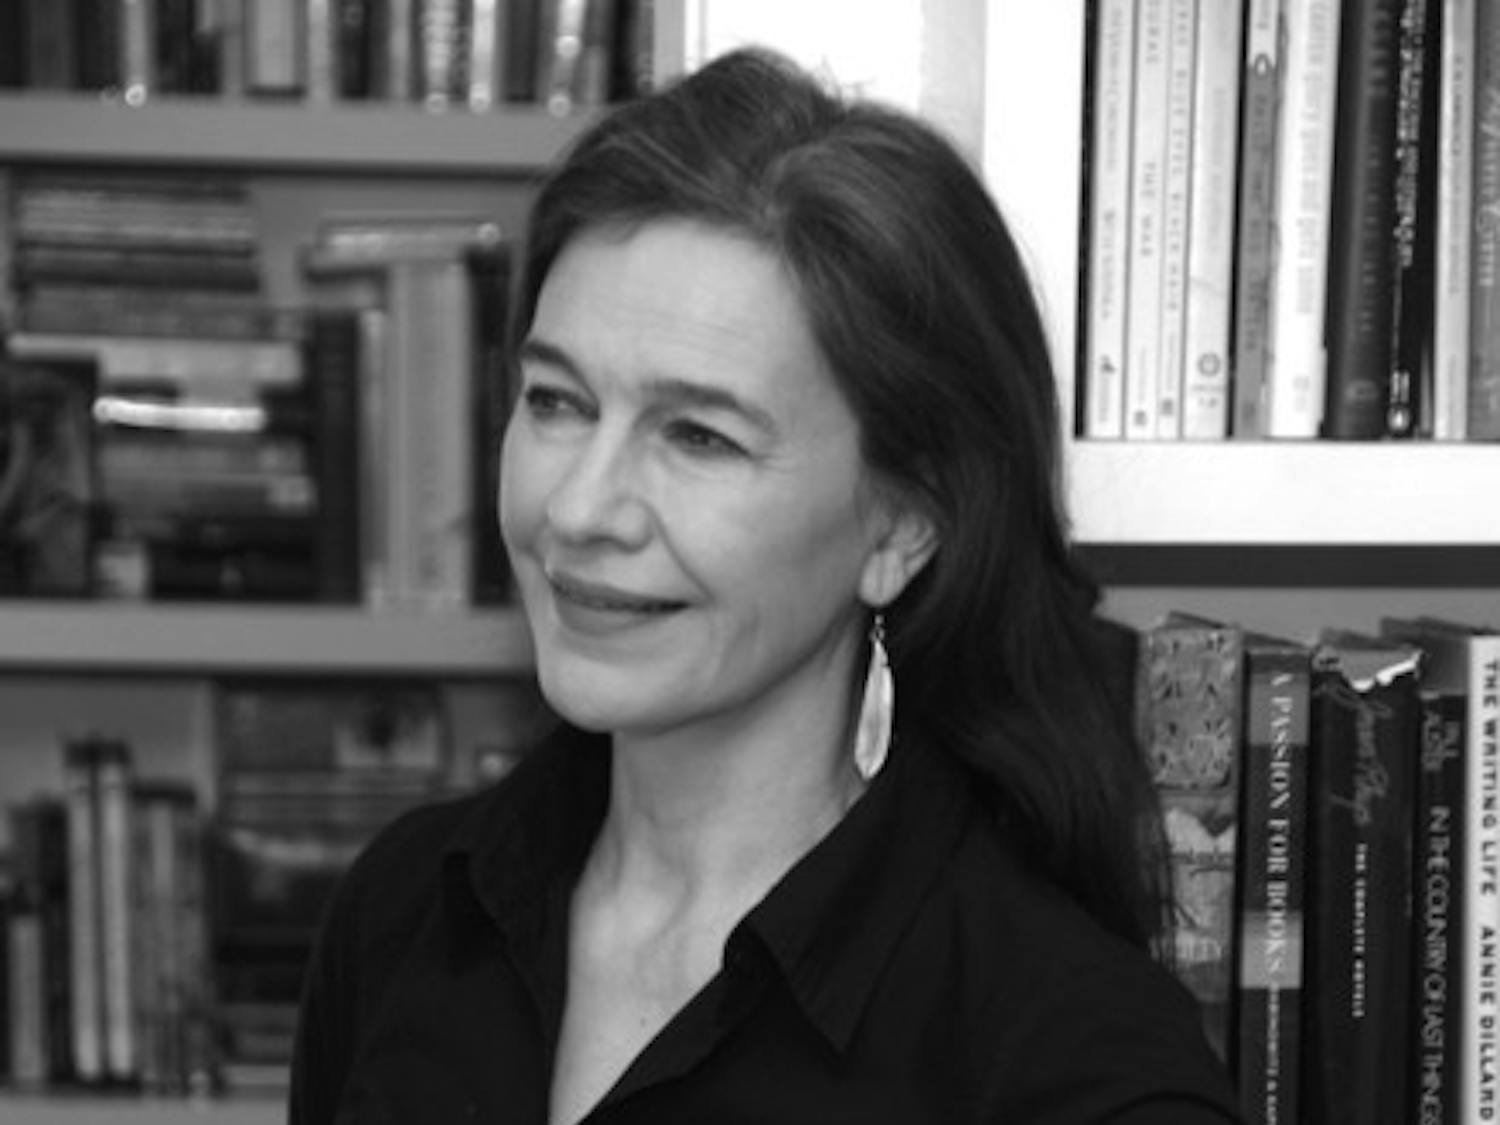 Bestselling author Louise Erdrich '76 will give the keynote address at Dartmouth's 2009 Commencement exercises on June 14.